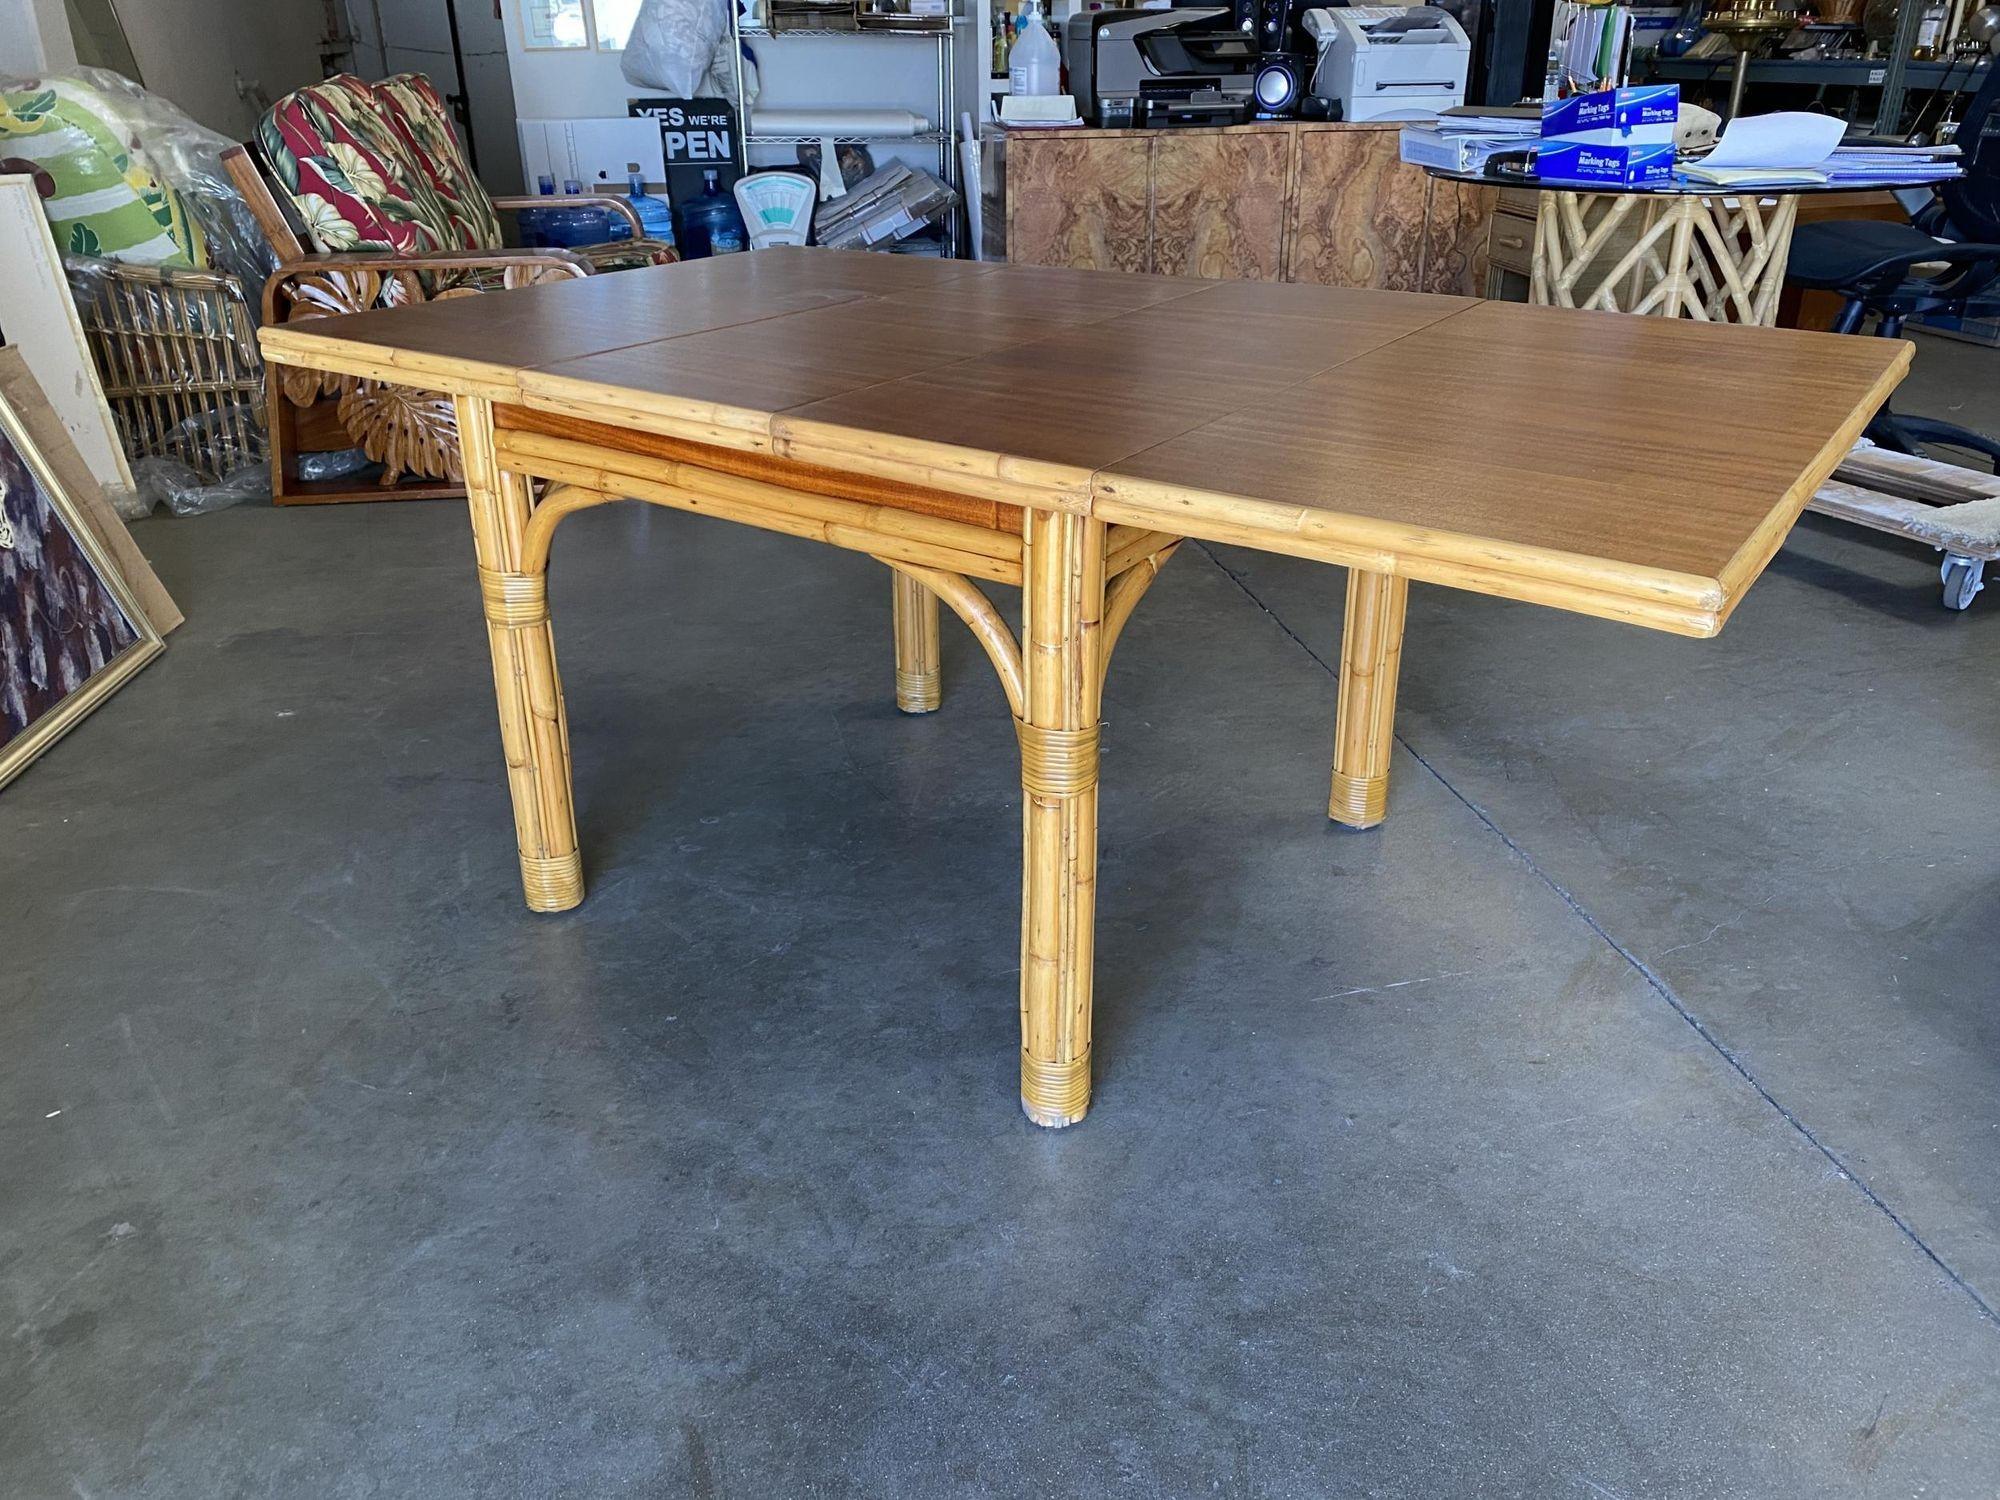 Mid-century six-eight person rattan dining table with pole rattan base and a solid mahogany table.

The large rattan dining table comes with three pole rattan legs and a solid mahogany table complete with two leaves that pull out / pull-out from